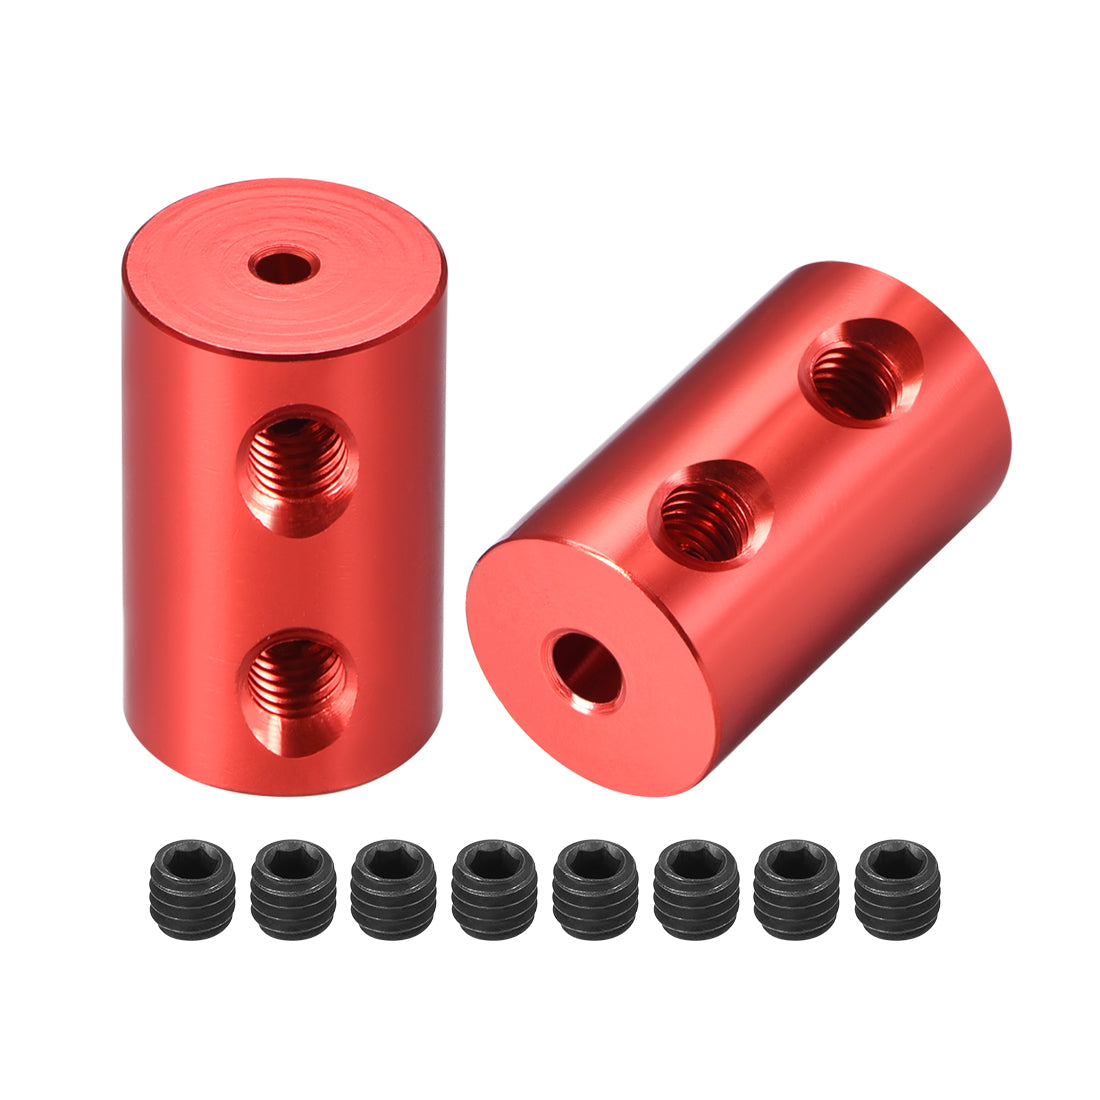 uxcell Uxcell Shaft Coupling 2mm to 3mm Bore L20xD12 Robot Motor Wheel Rigid Coupler Connector Red 2 Pcs